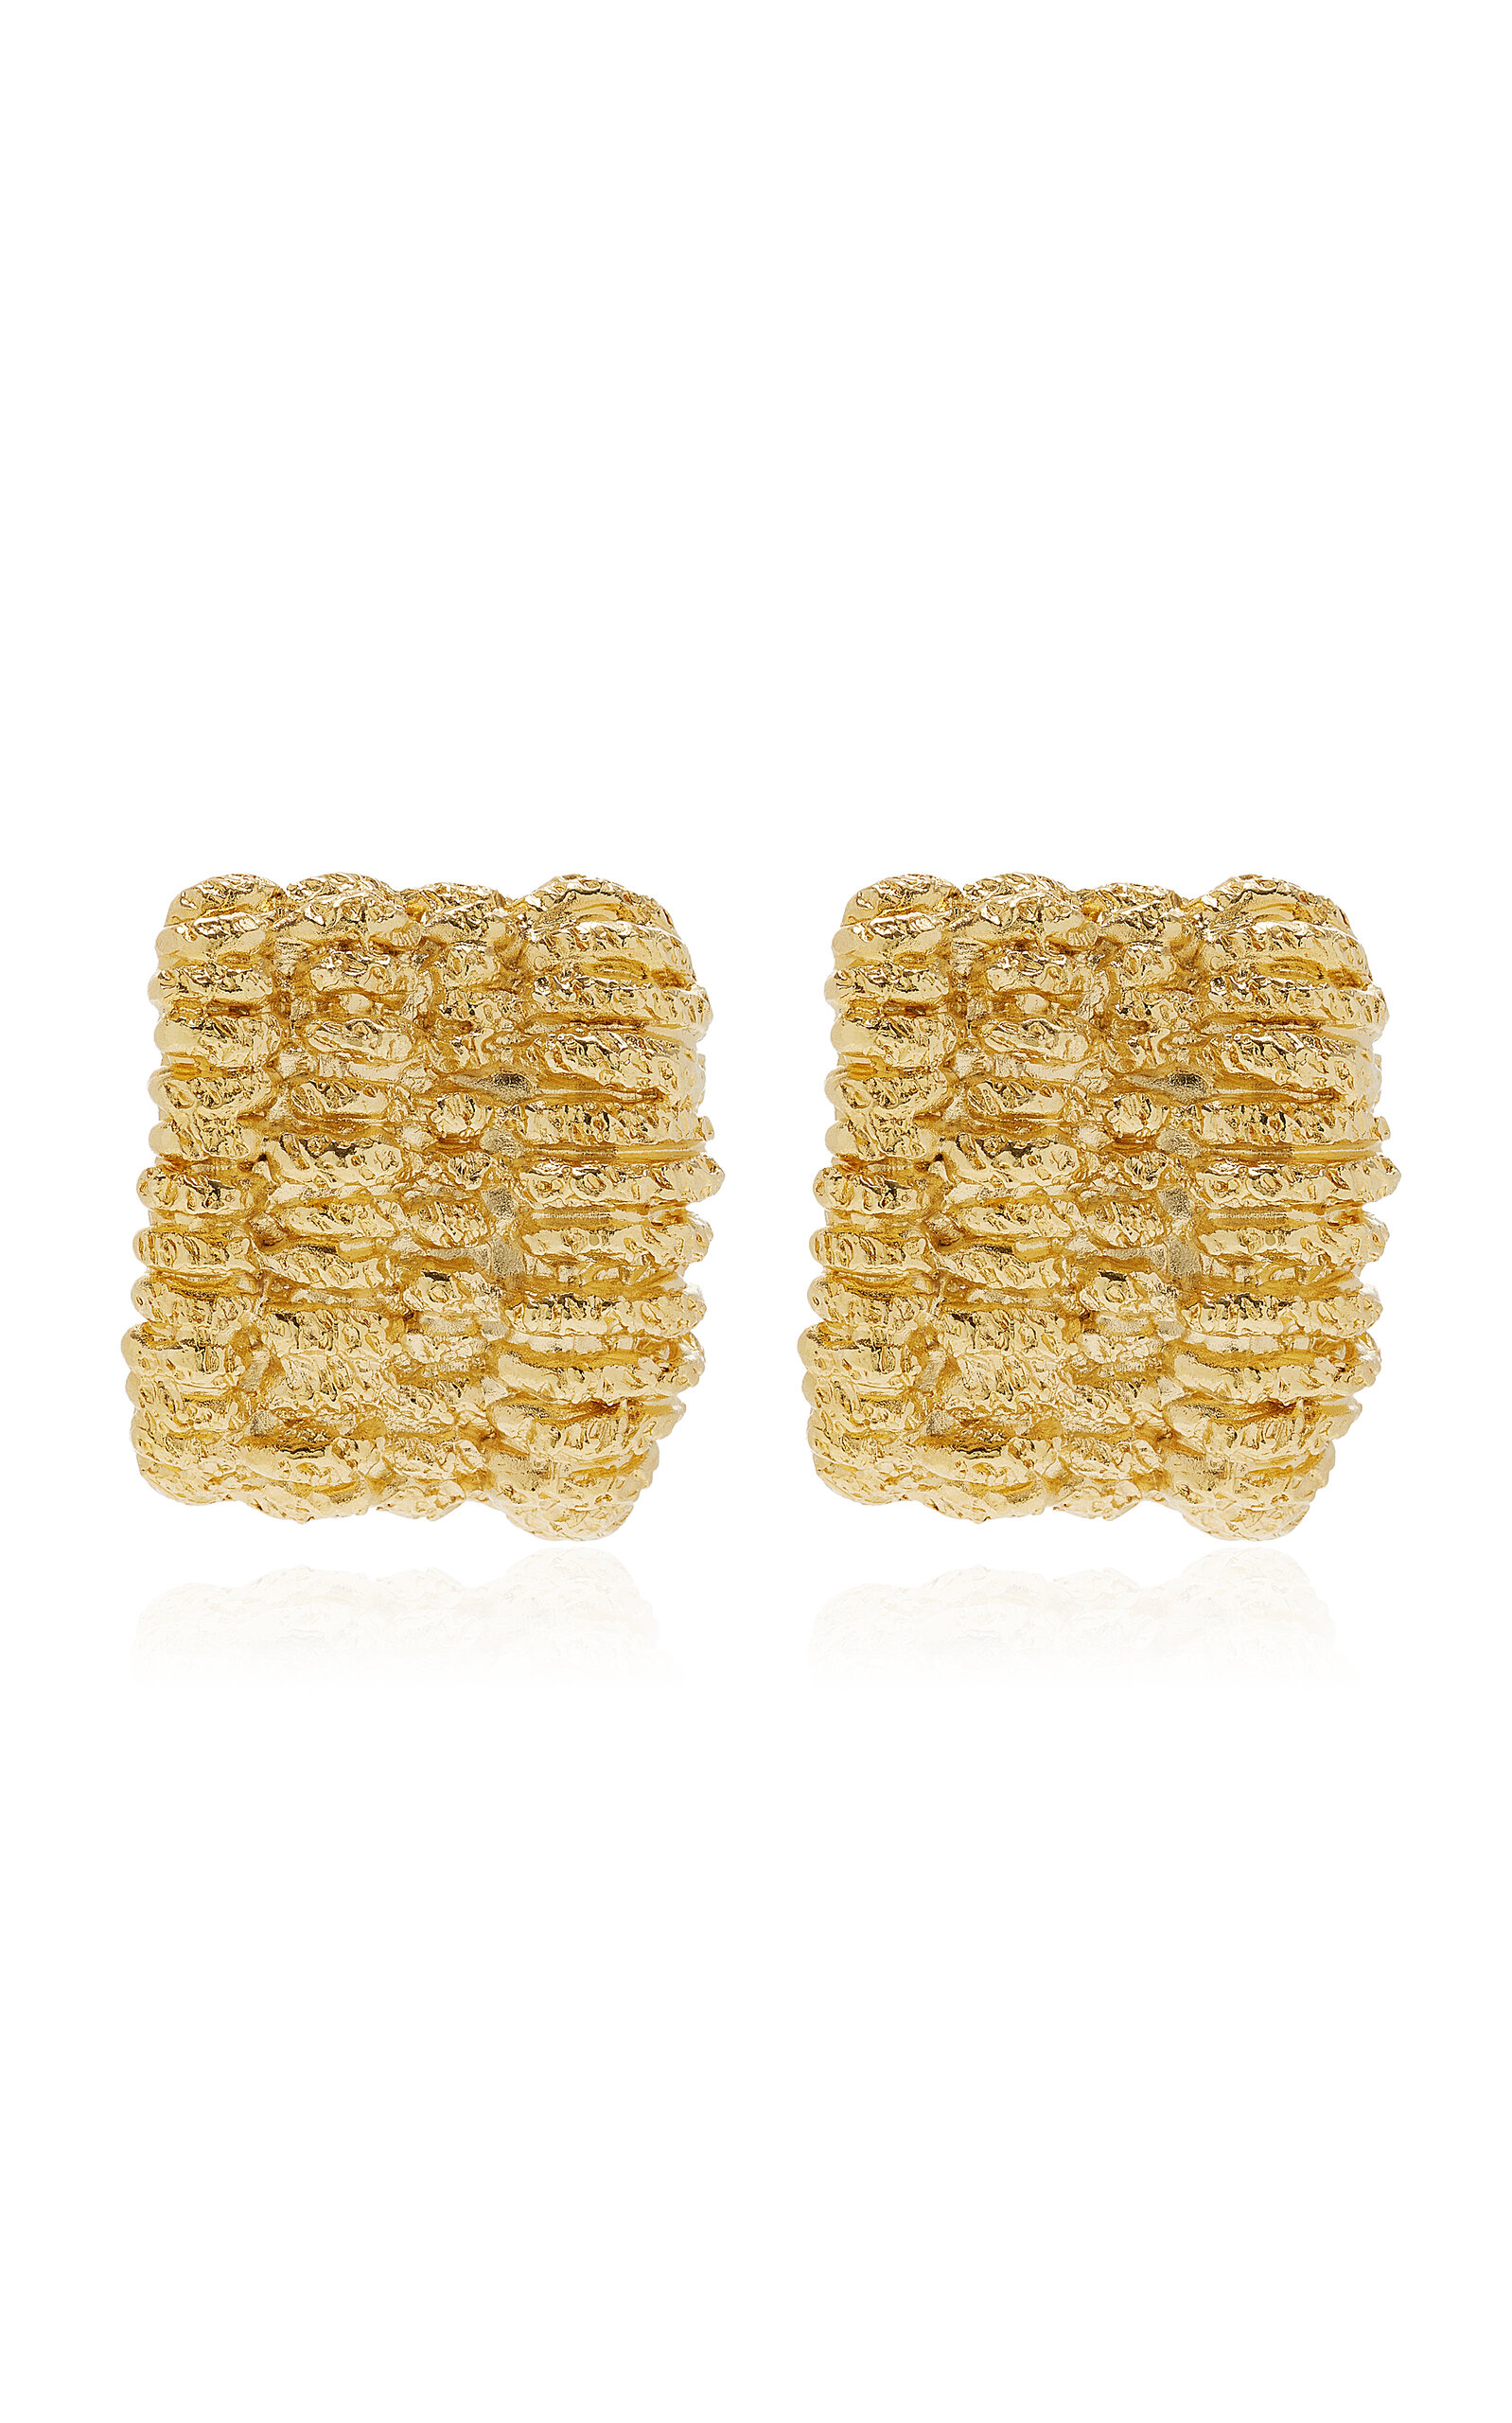 Shop Paola Sighinolfi Sonora Small 18k Gold-plated Earrings